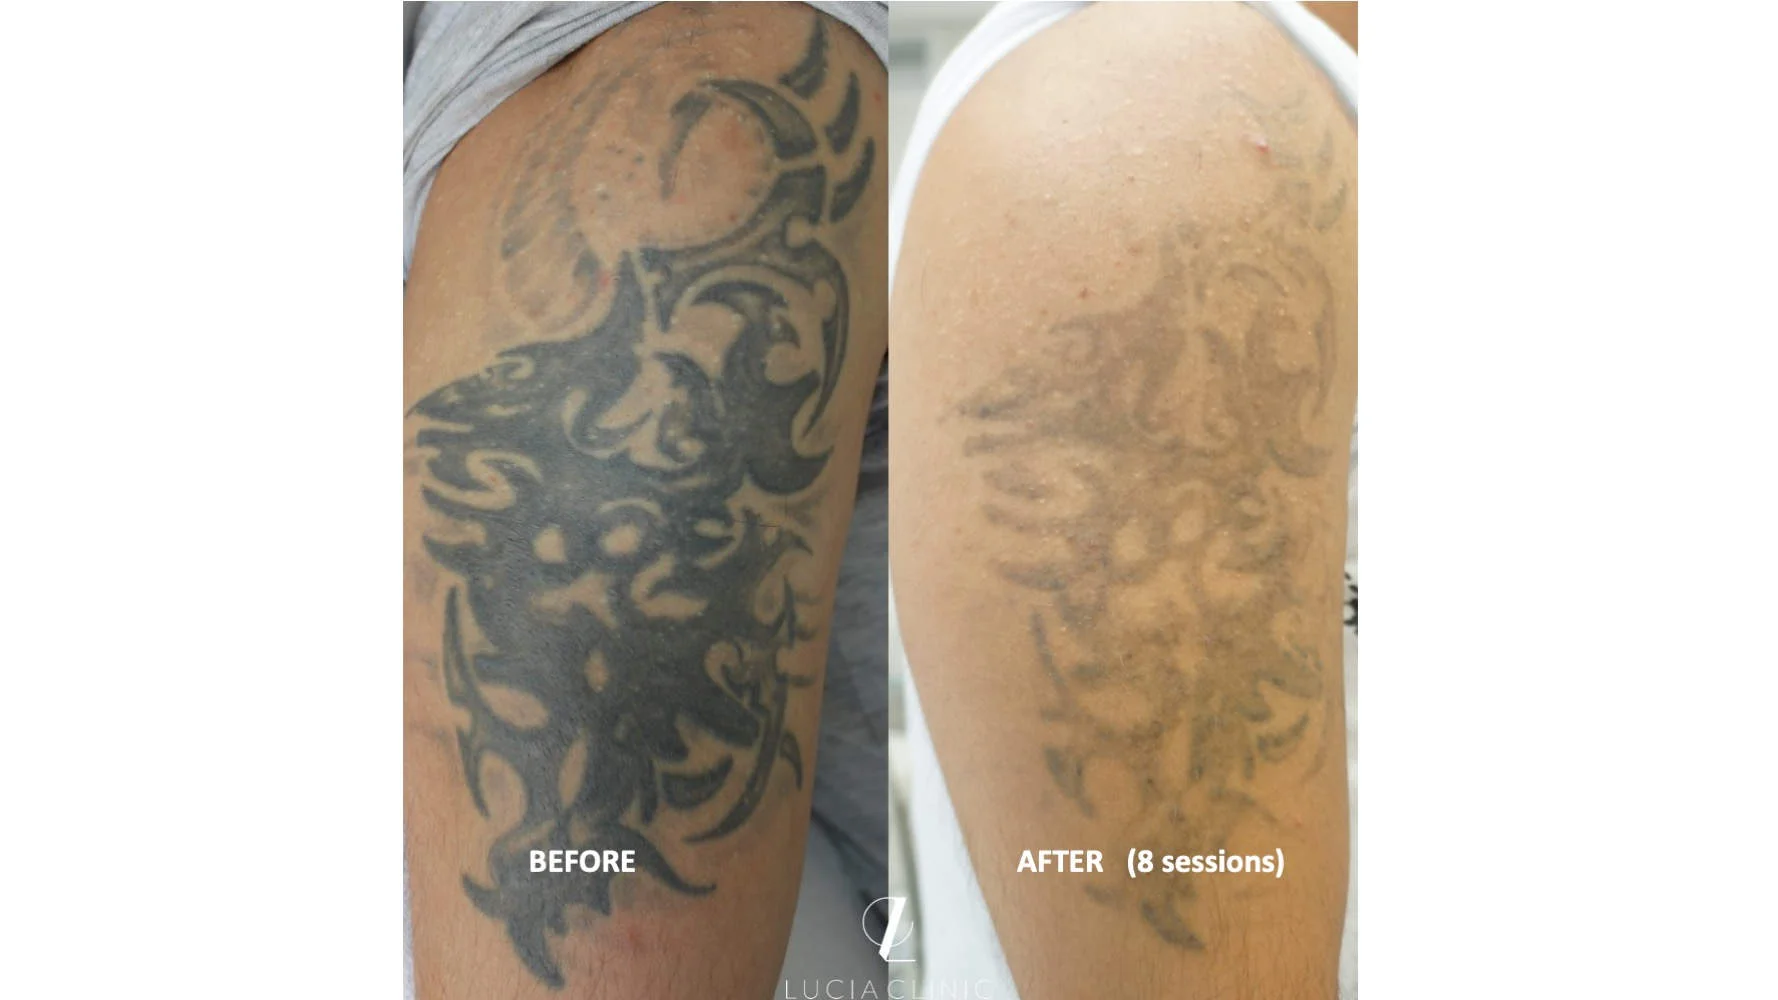 TATTOO REMOVAL PROCEDURE - MAKE THE UNWANTED INK GO AWAY